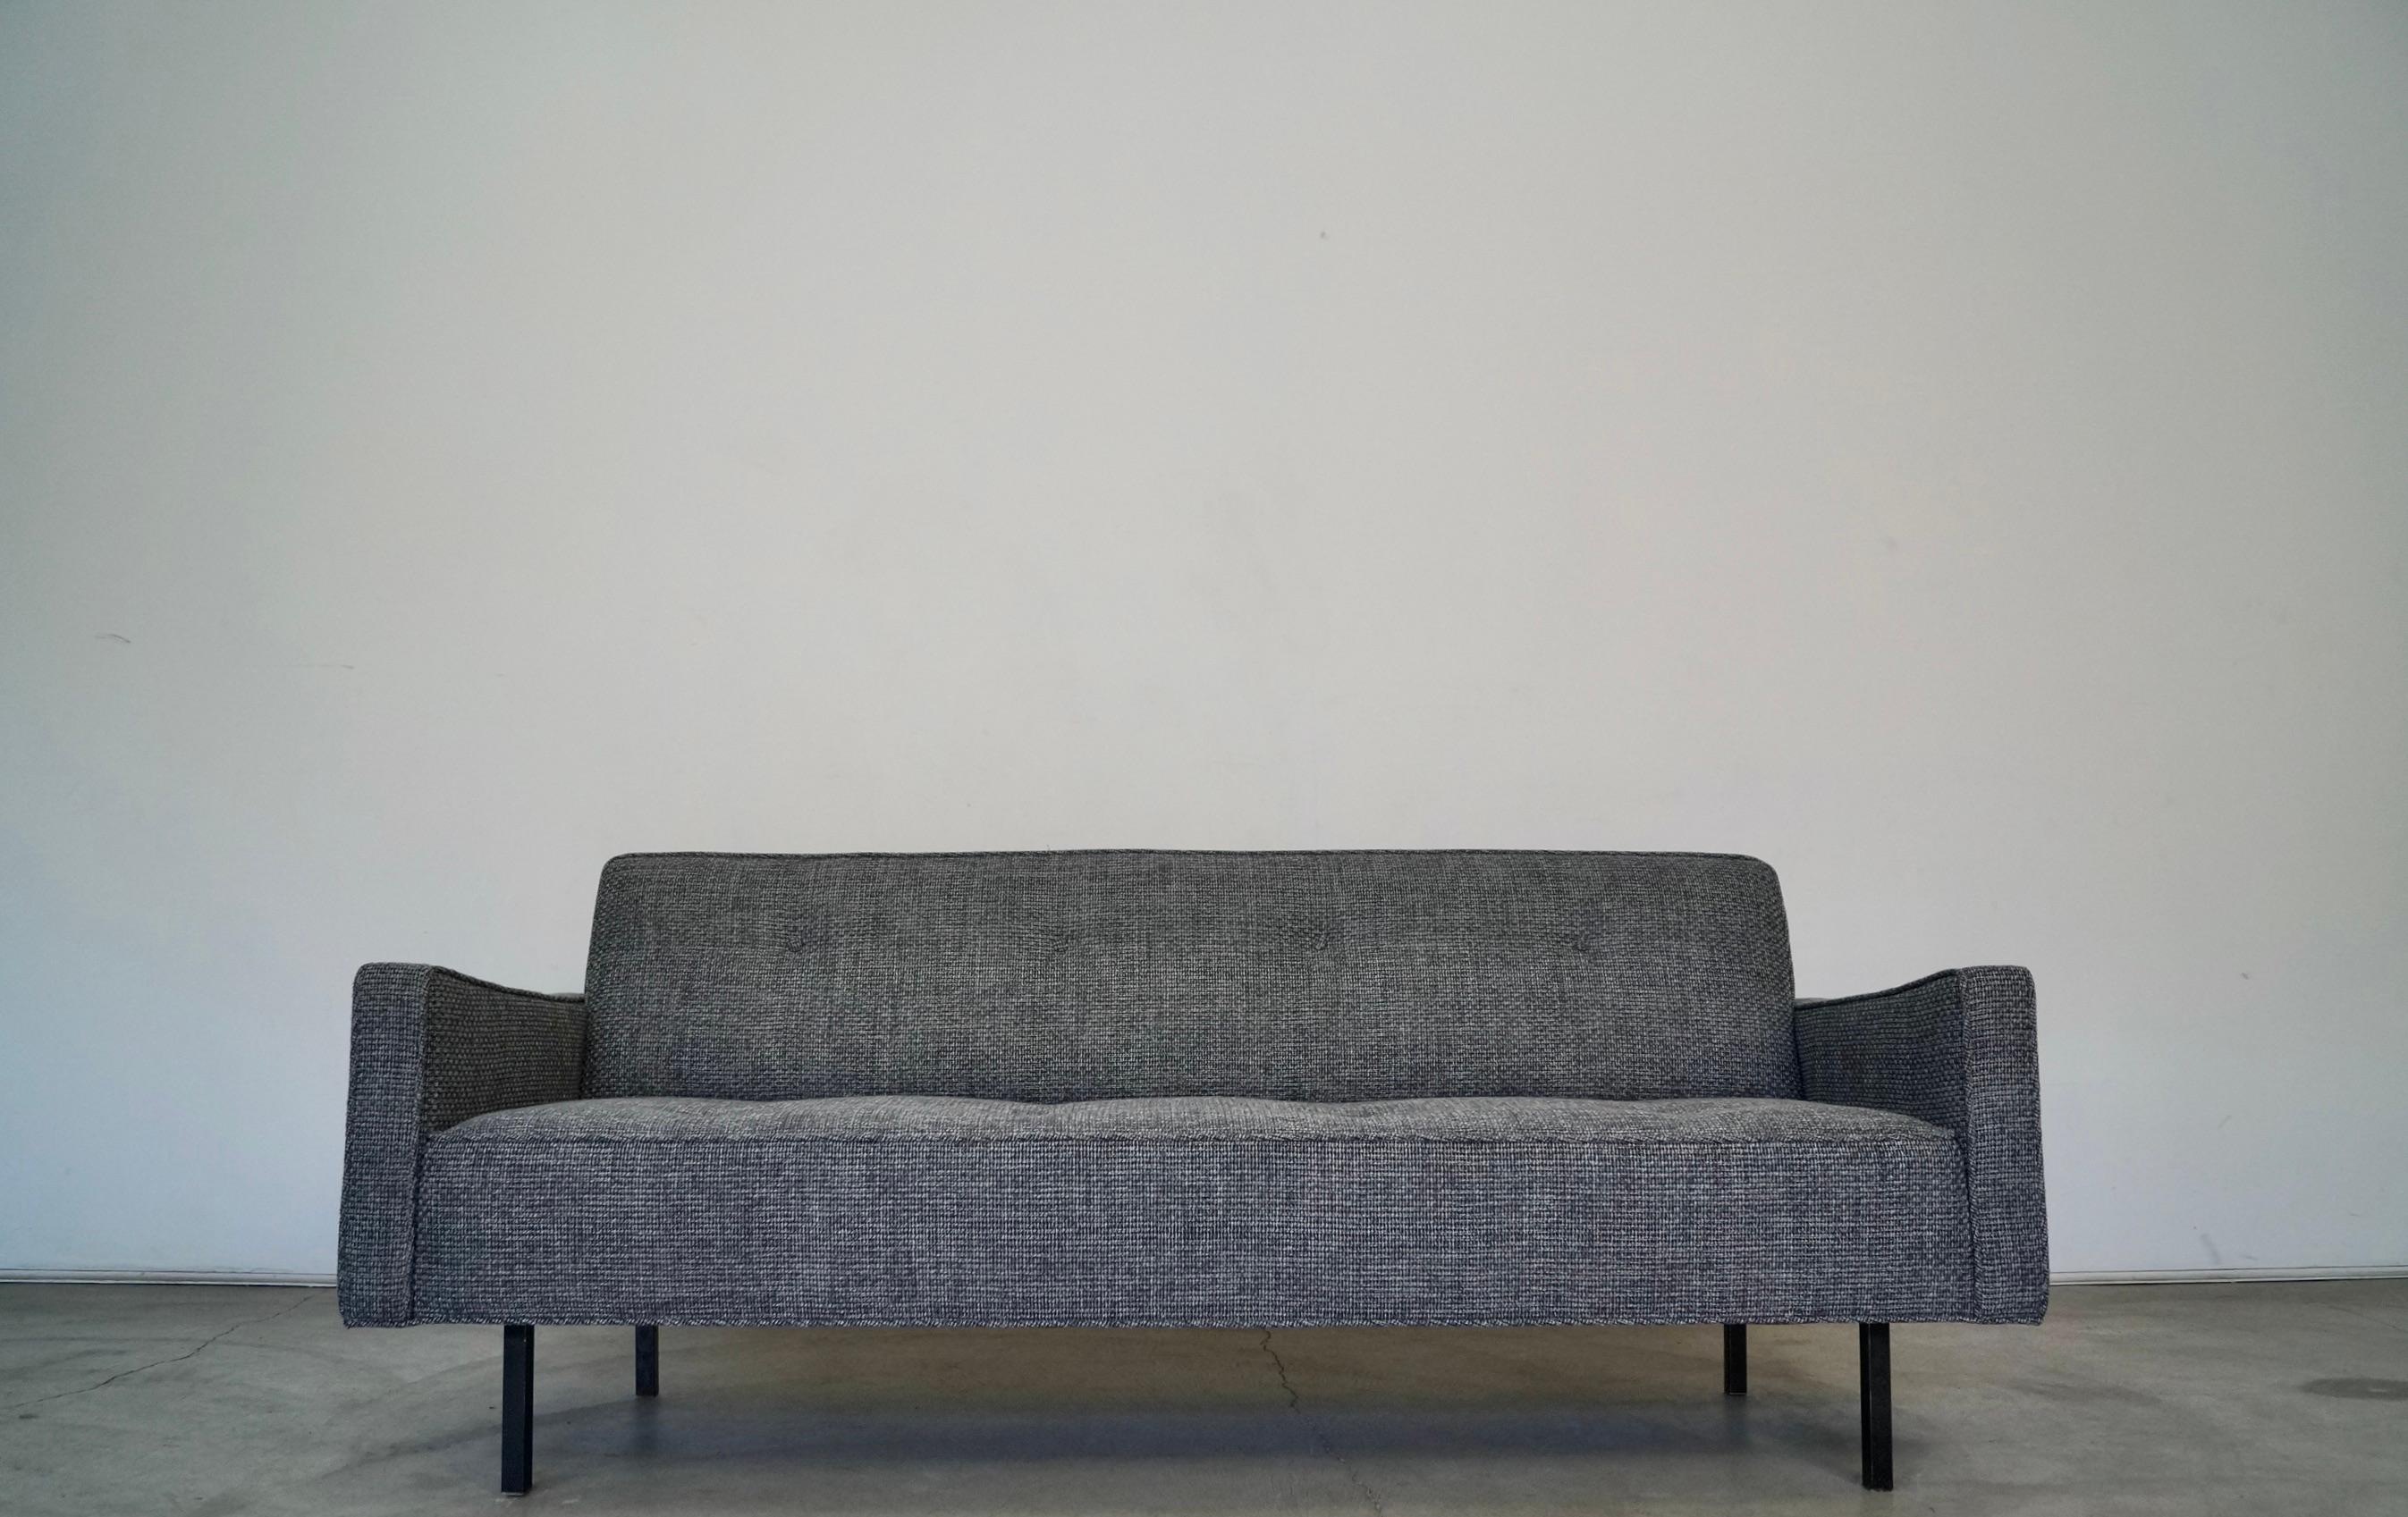 Vintage 1960s Mid-Century Modern couch for sale. It has been professionally reupholstered in new tweed and foam, and is in restored condition. It has a beautiful frame with incredible lines in the manner of George Nelson for Herman Miller. It sits